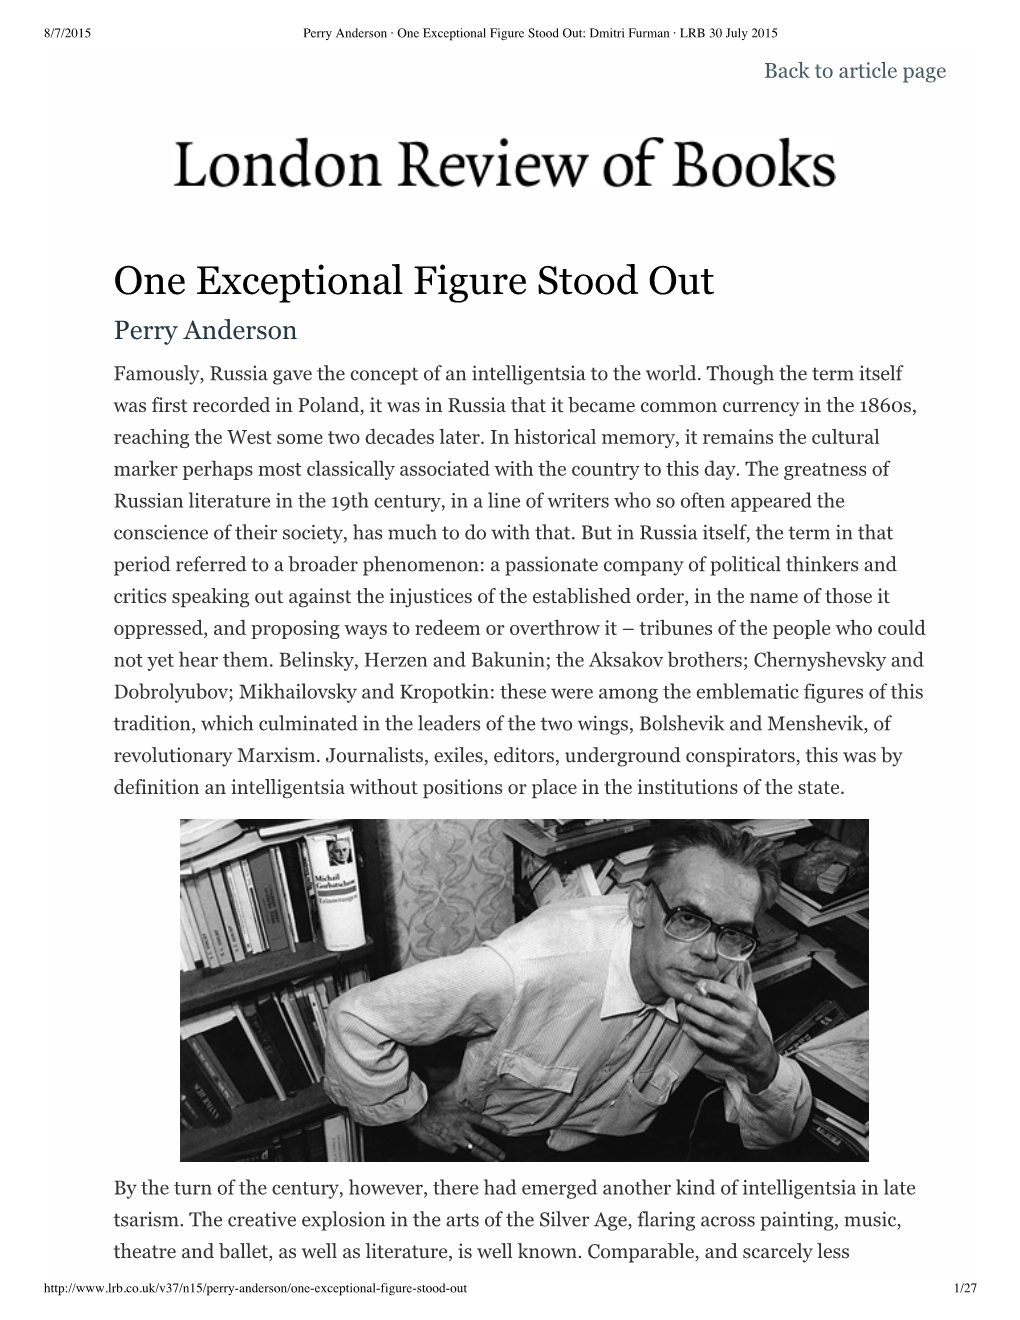 Perry Anderson · One Exc...Rman · LRB 30 July 2015